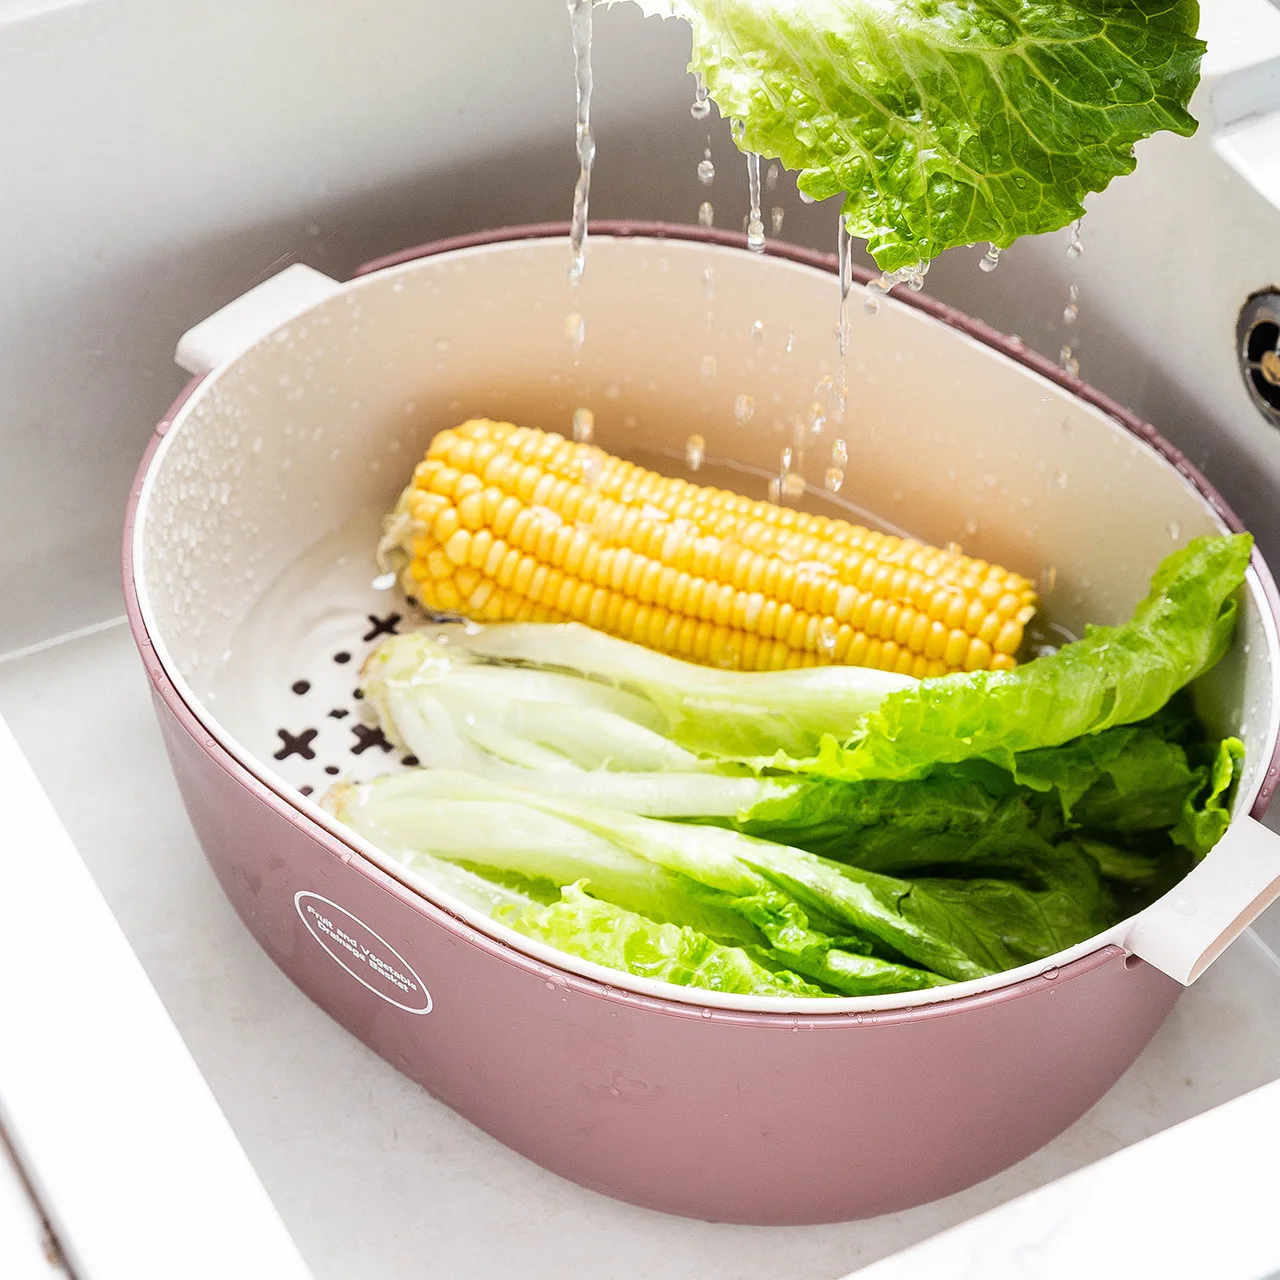 

Cleaning Tool PP Double Kitchen Drain Basket Bowl Rice Washing Colander Baskets Strainers Bowls Drainer Vegetable Fruit